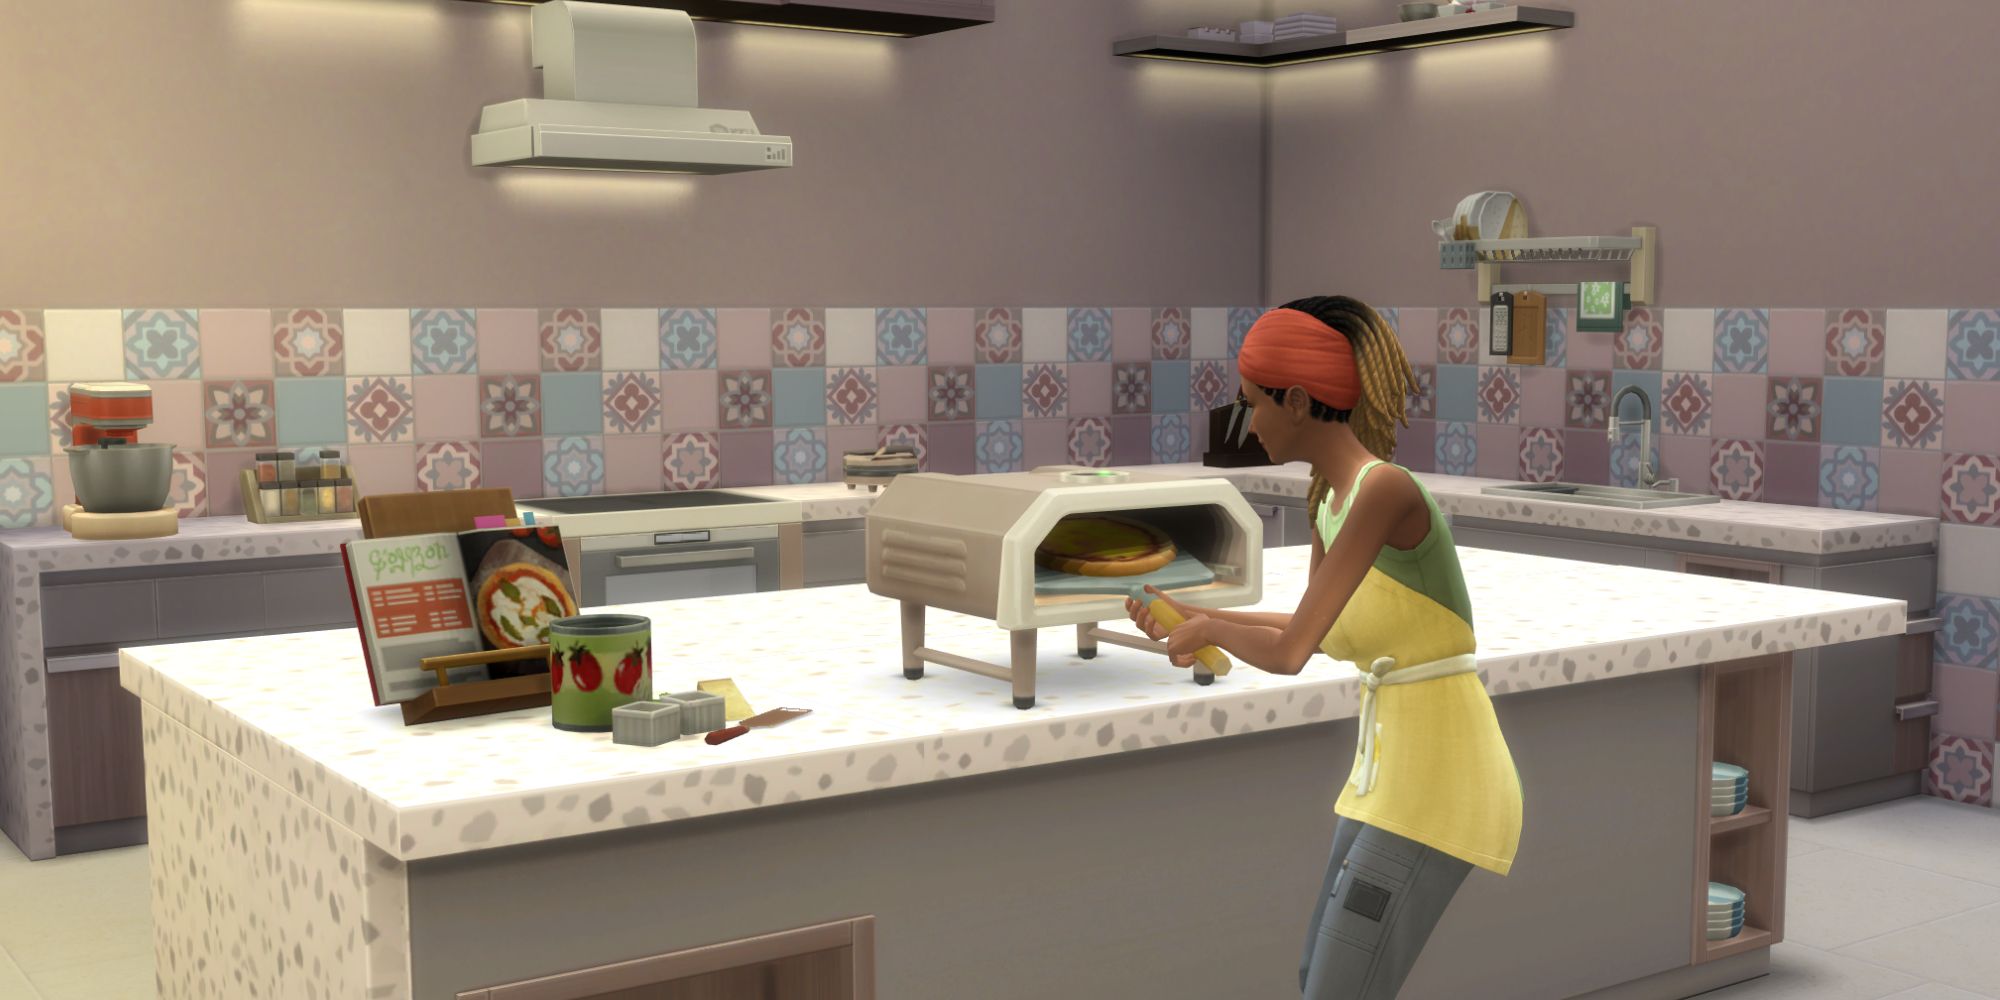 The Sims 4 HCH Sim taking a pizza from the oven in a HCH decorated kitchen